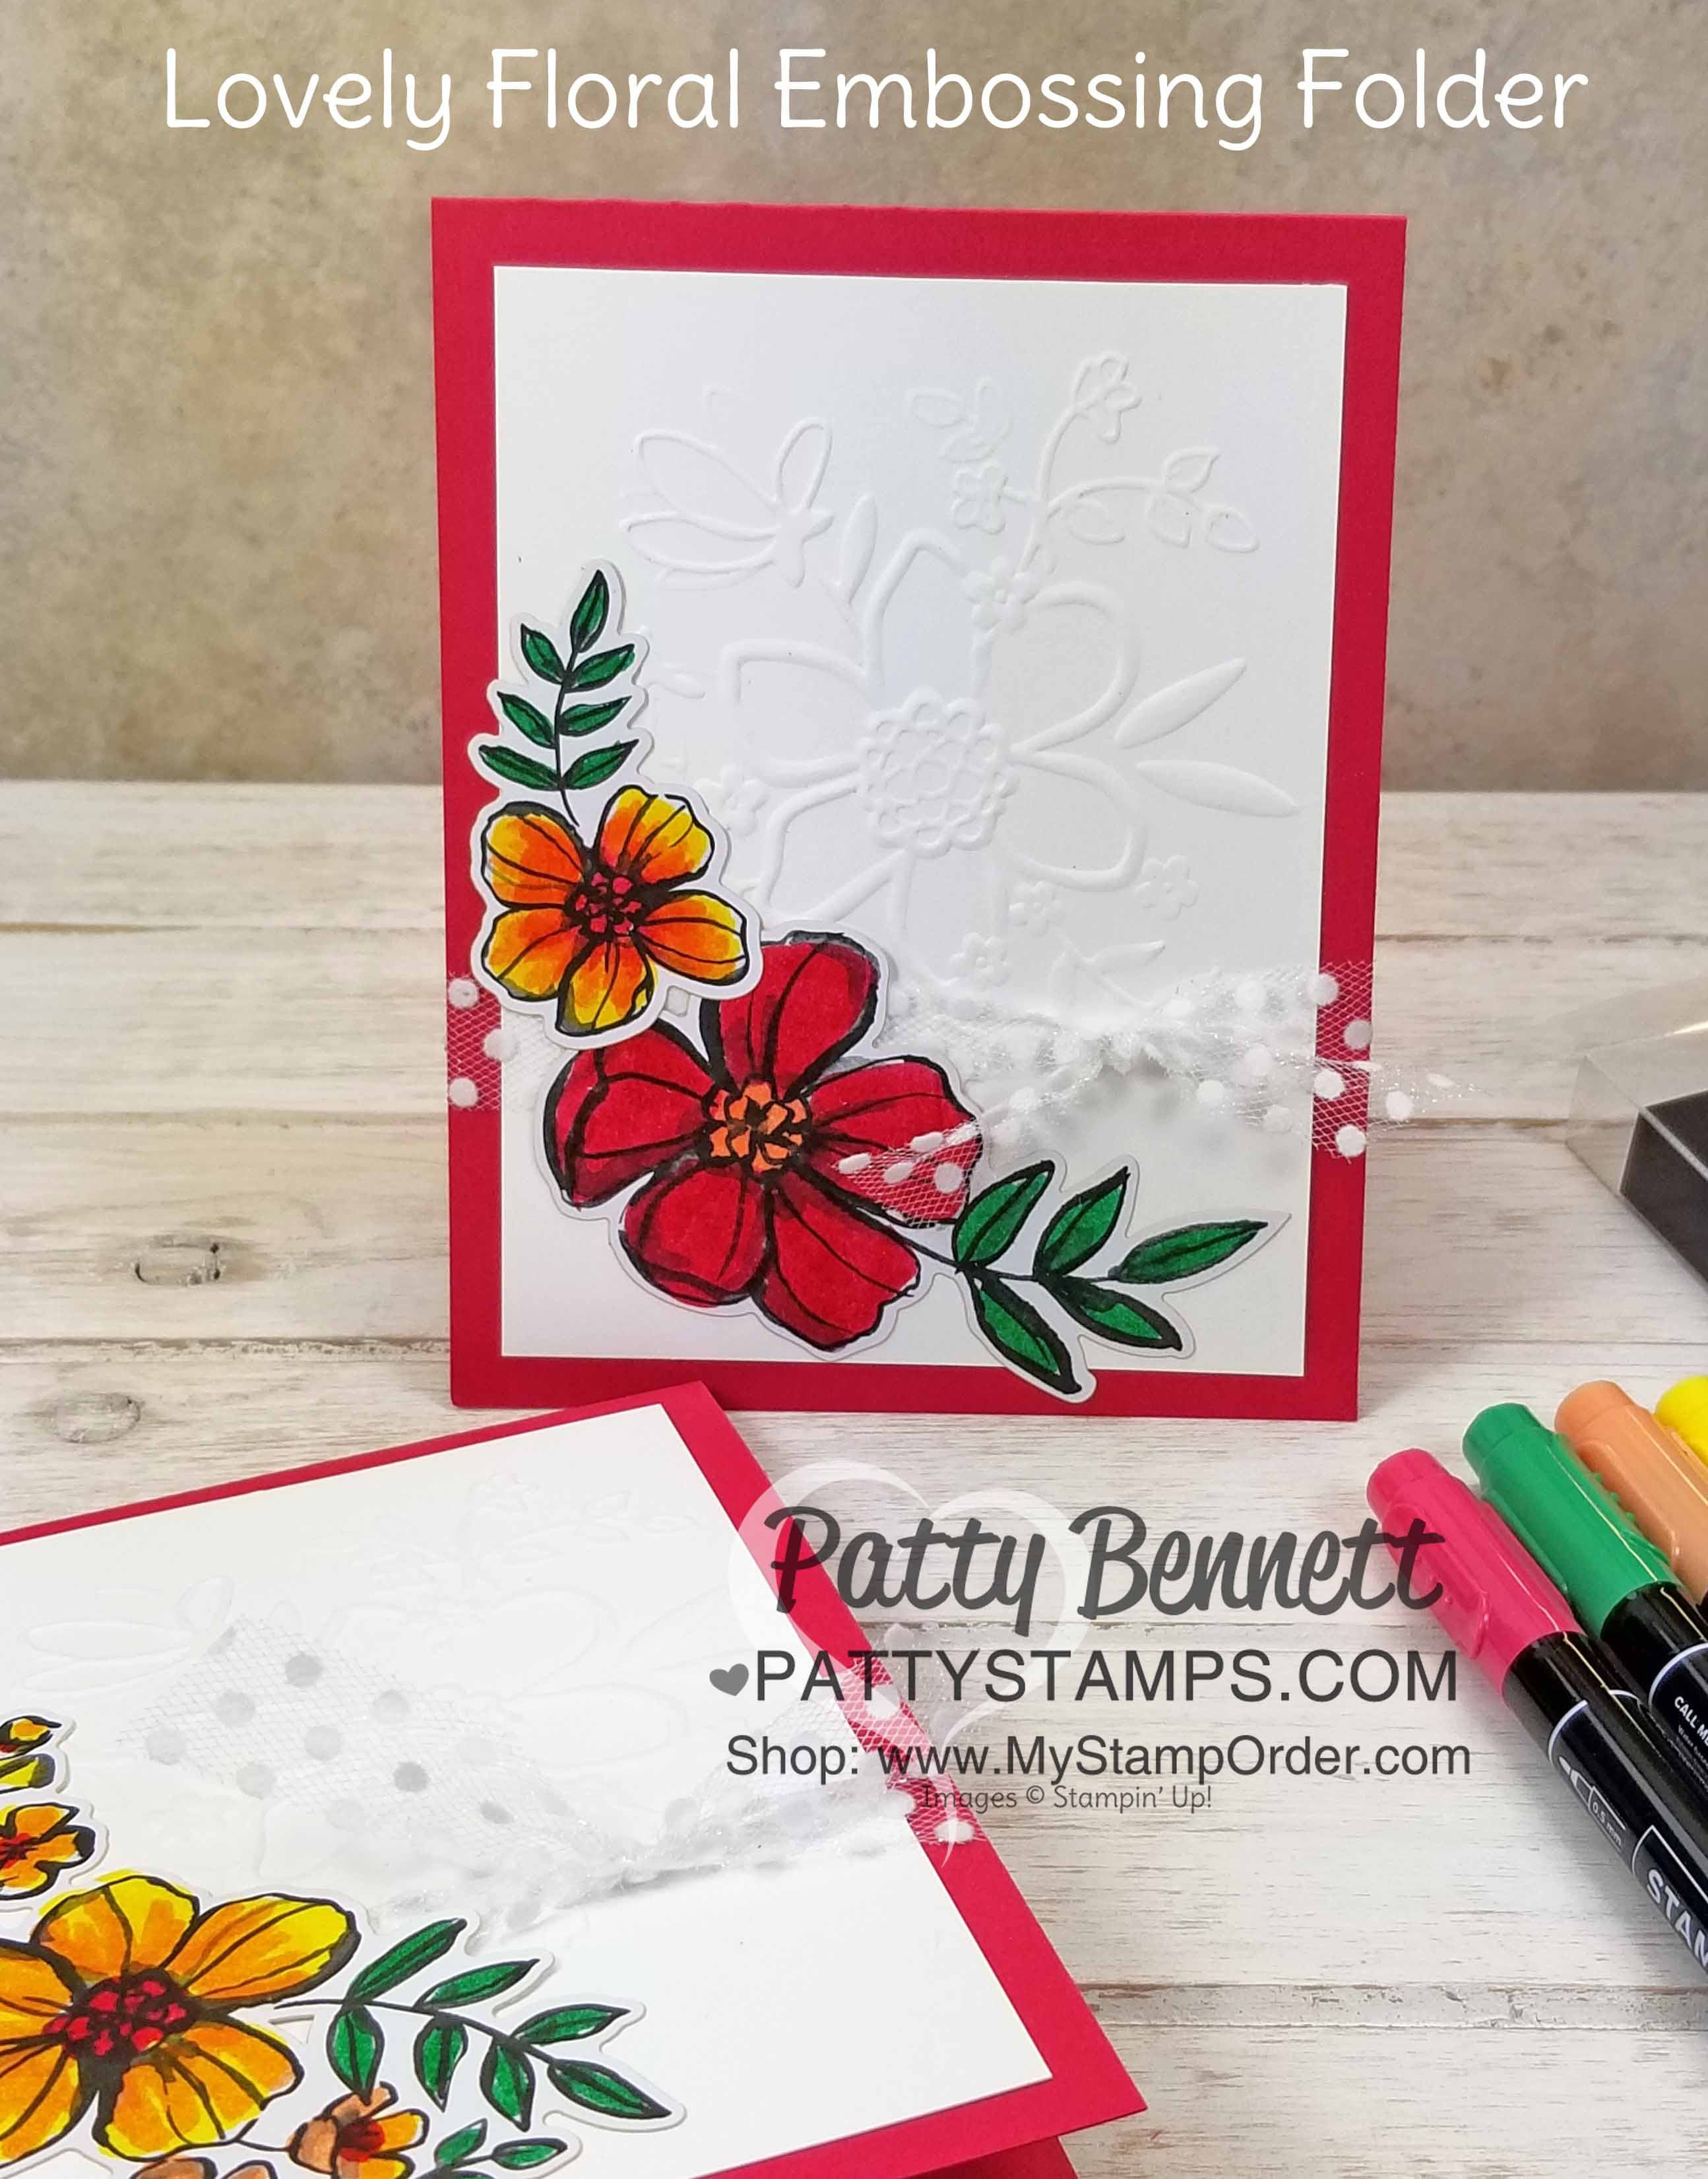 Embossed Birthday Card Ideas Lovely Floral Embossing Folder Card Idea Patty Stamps